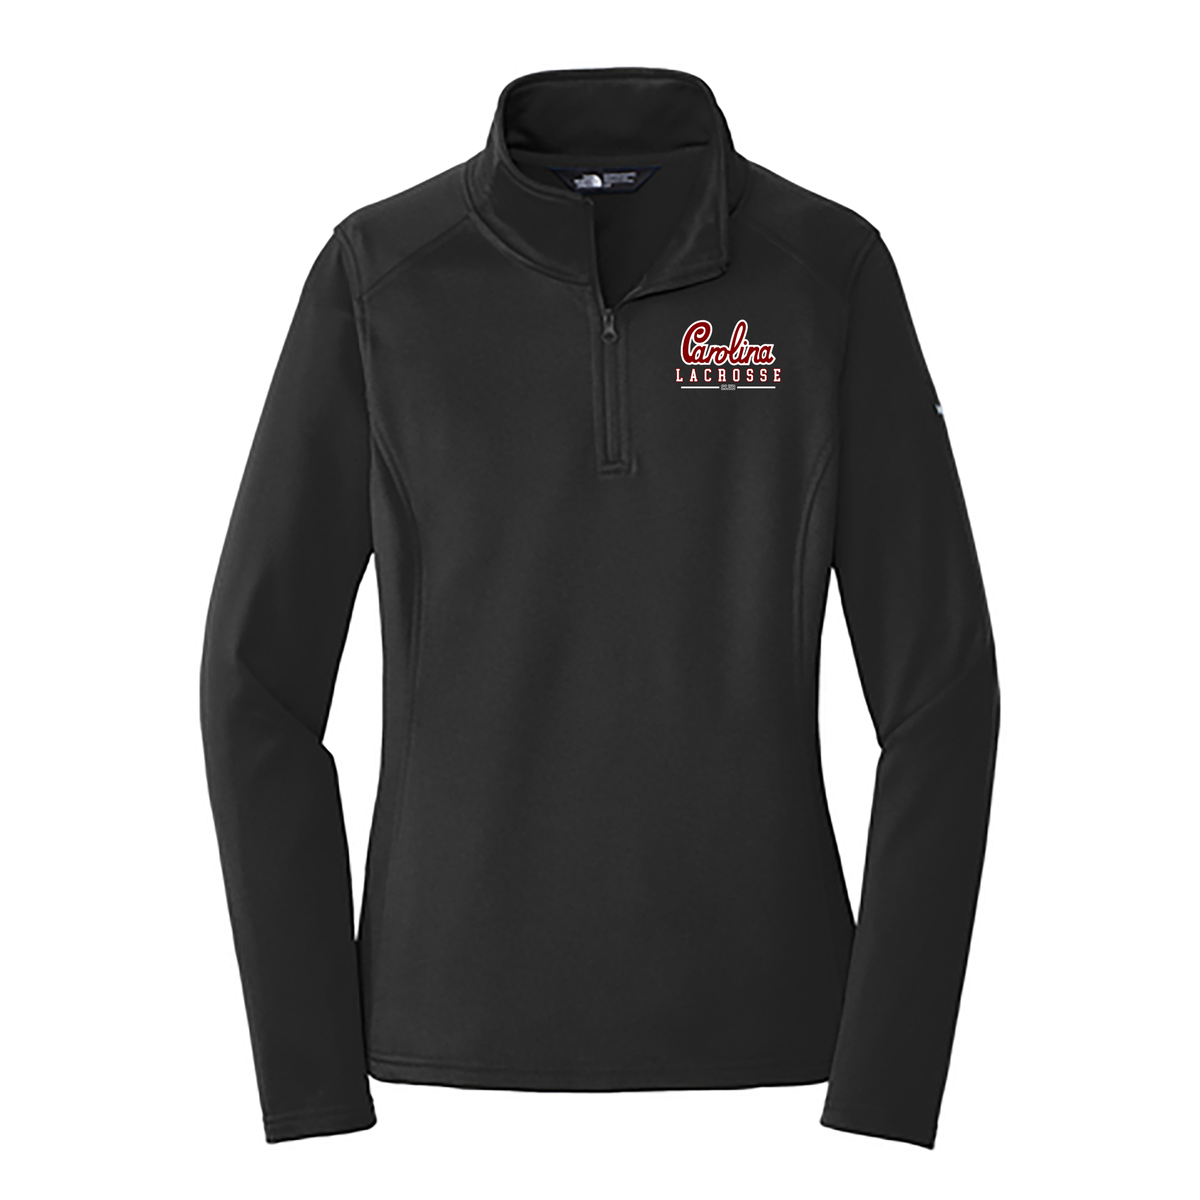 Gamecock Lacrosse The North Face Ladies Tech 1/4 Zip